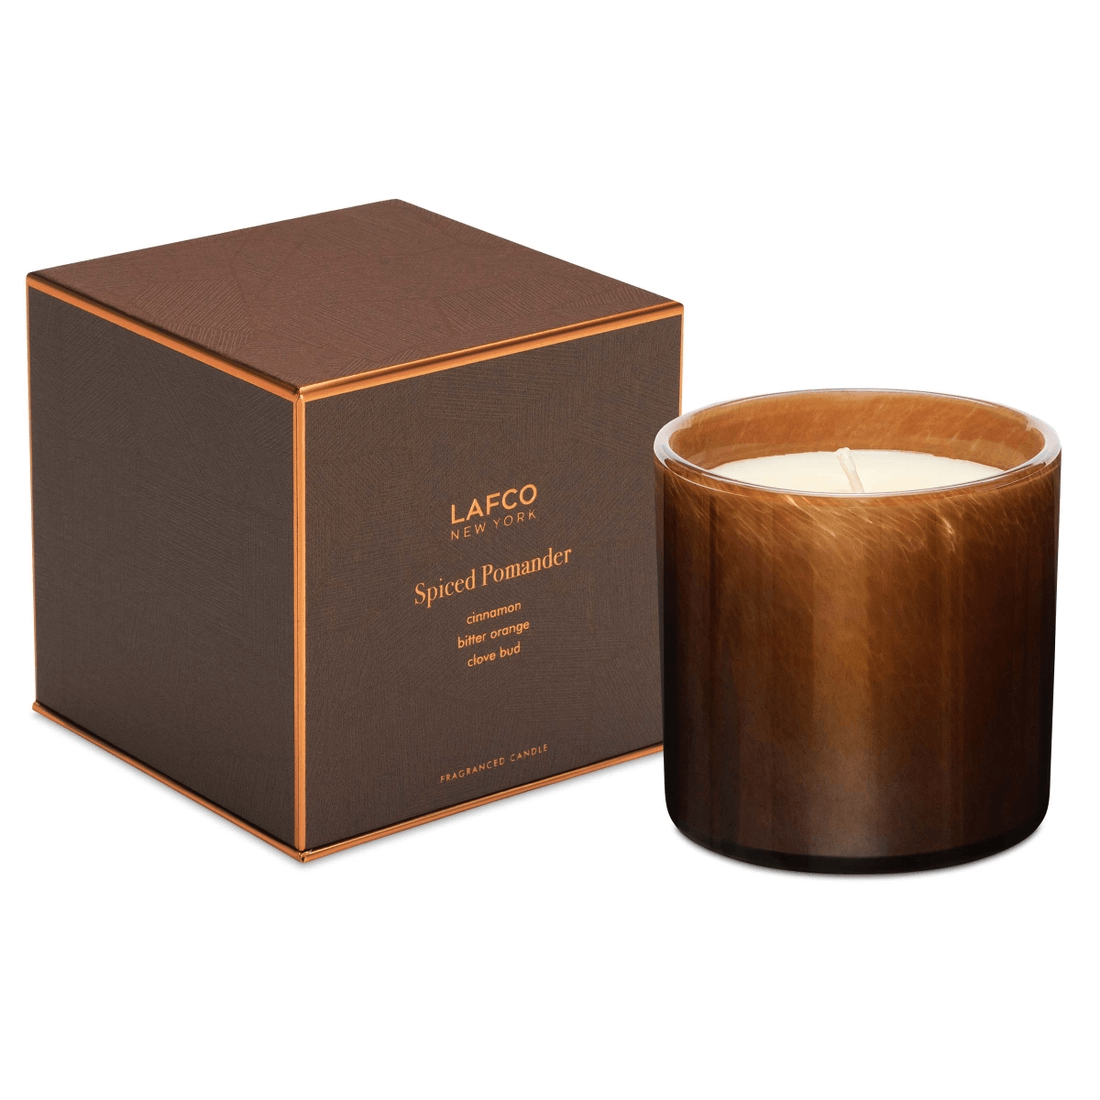 LAFCO Spiced Pomander Scented Candle - Osmology Scented Candles & Home Fragrance